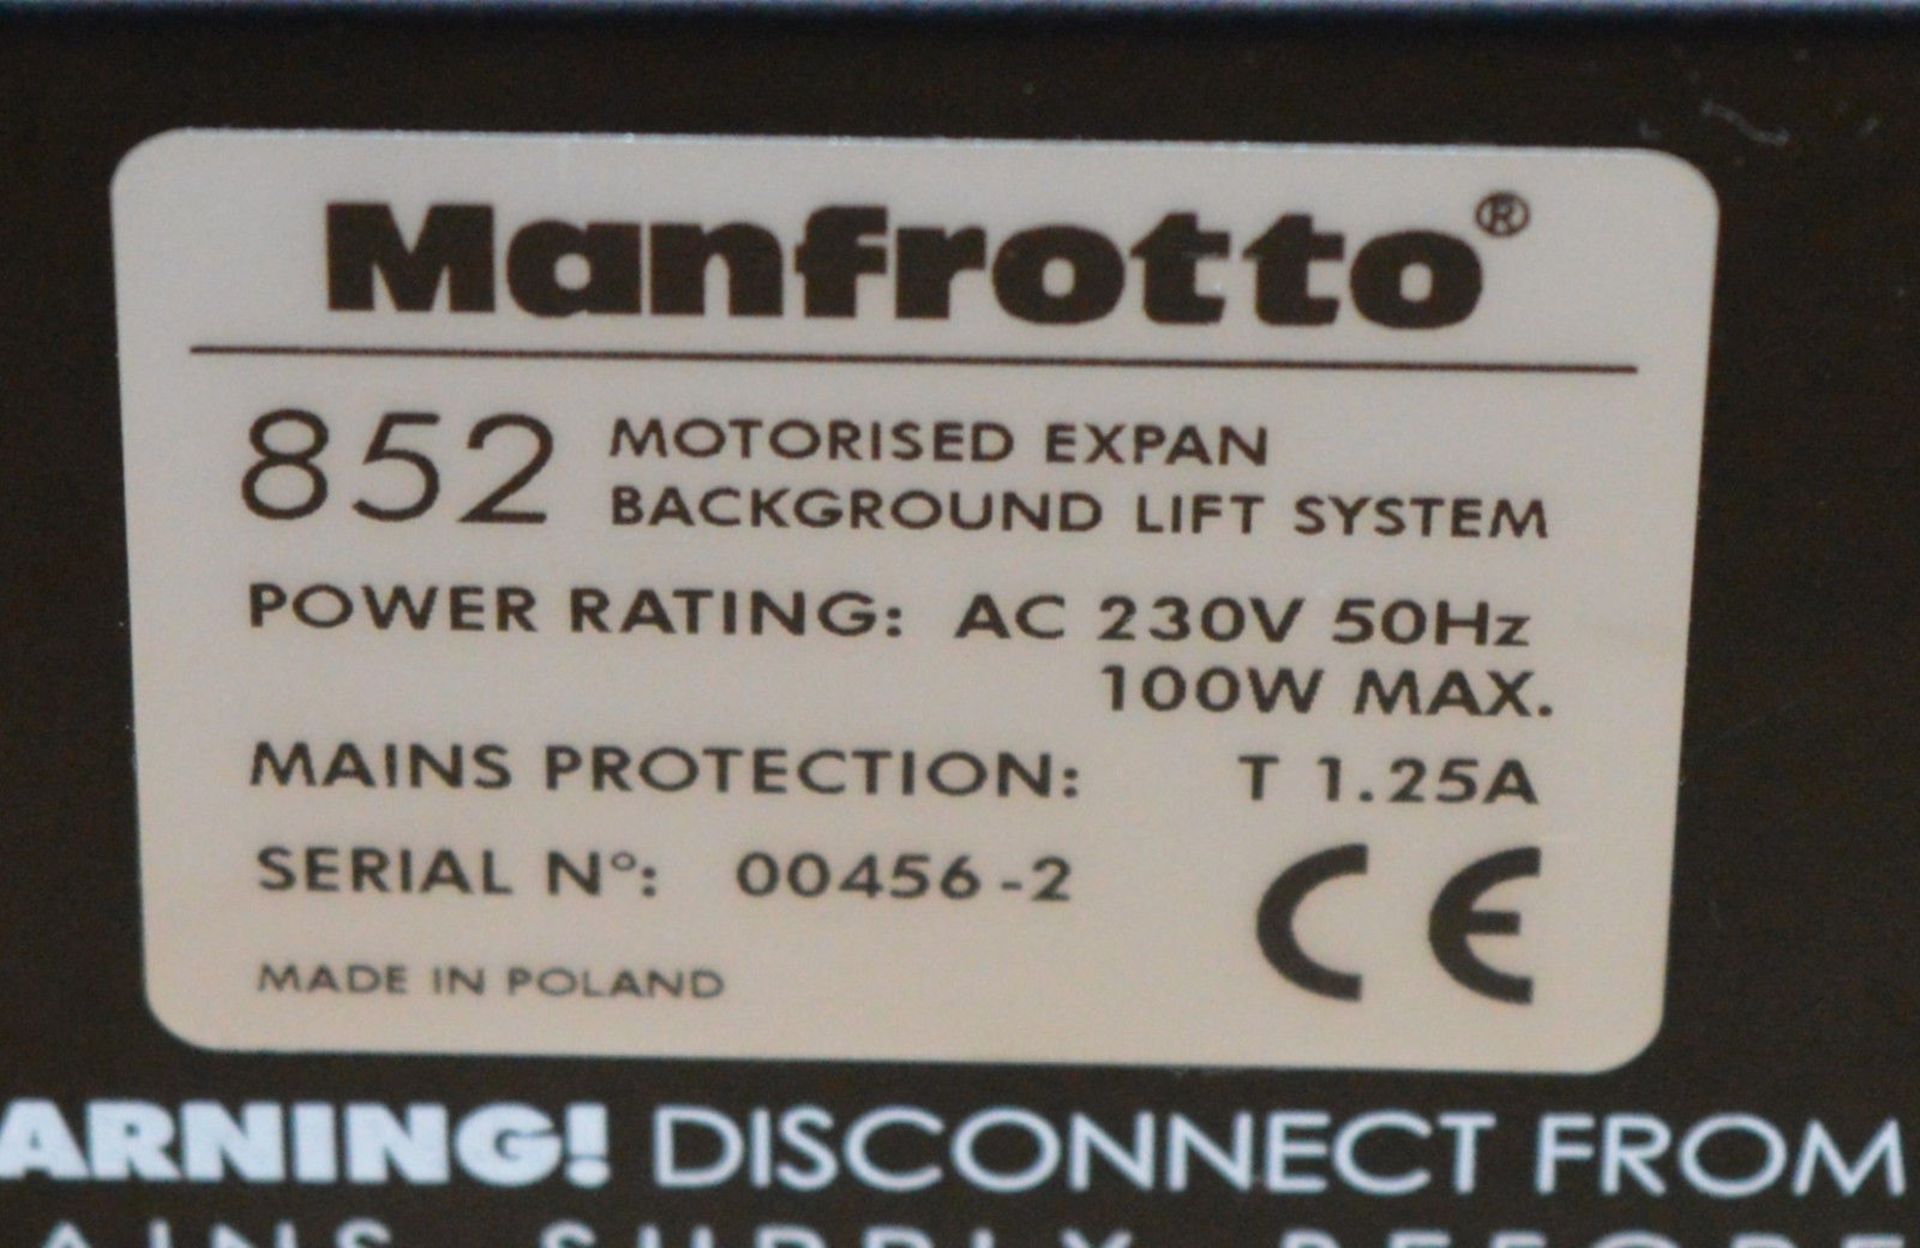 1 x Manfrotto 852 Motorised Expan Photography Background Lift System - Ideal for use in - Bild 5 aus 6